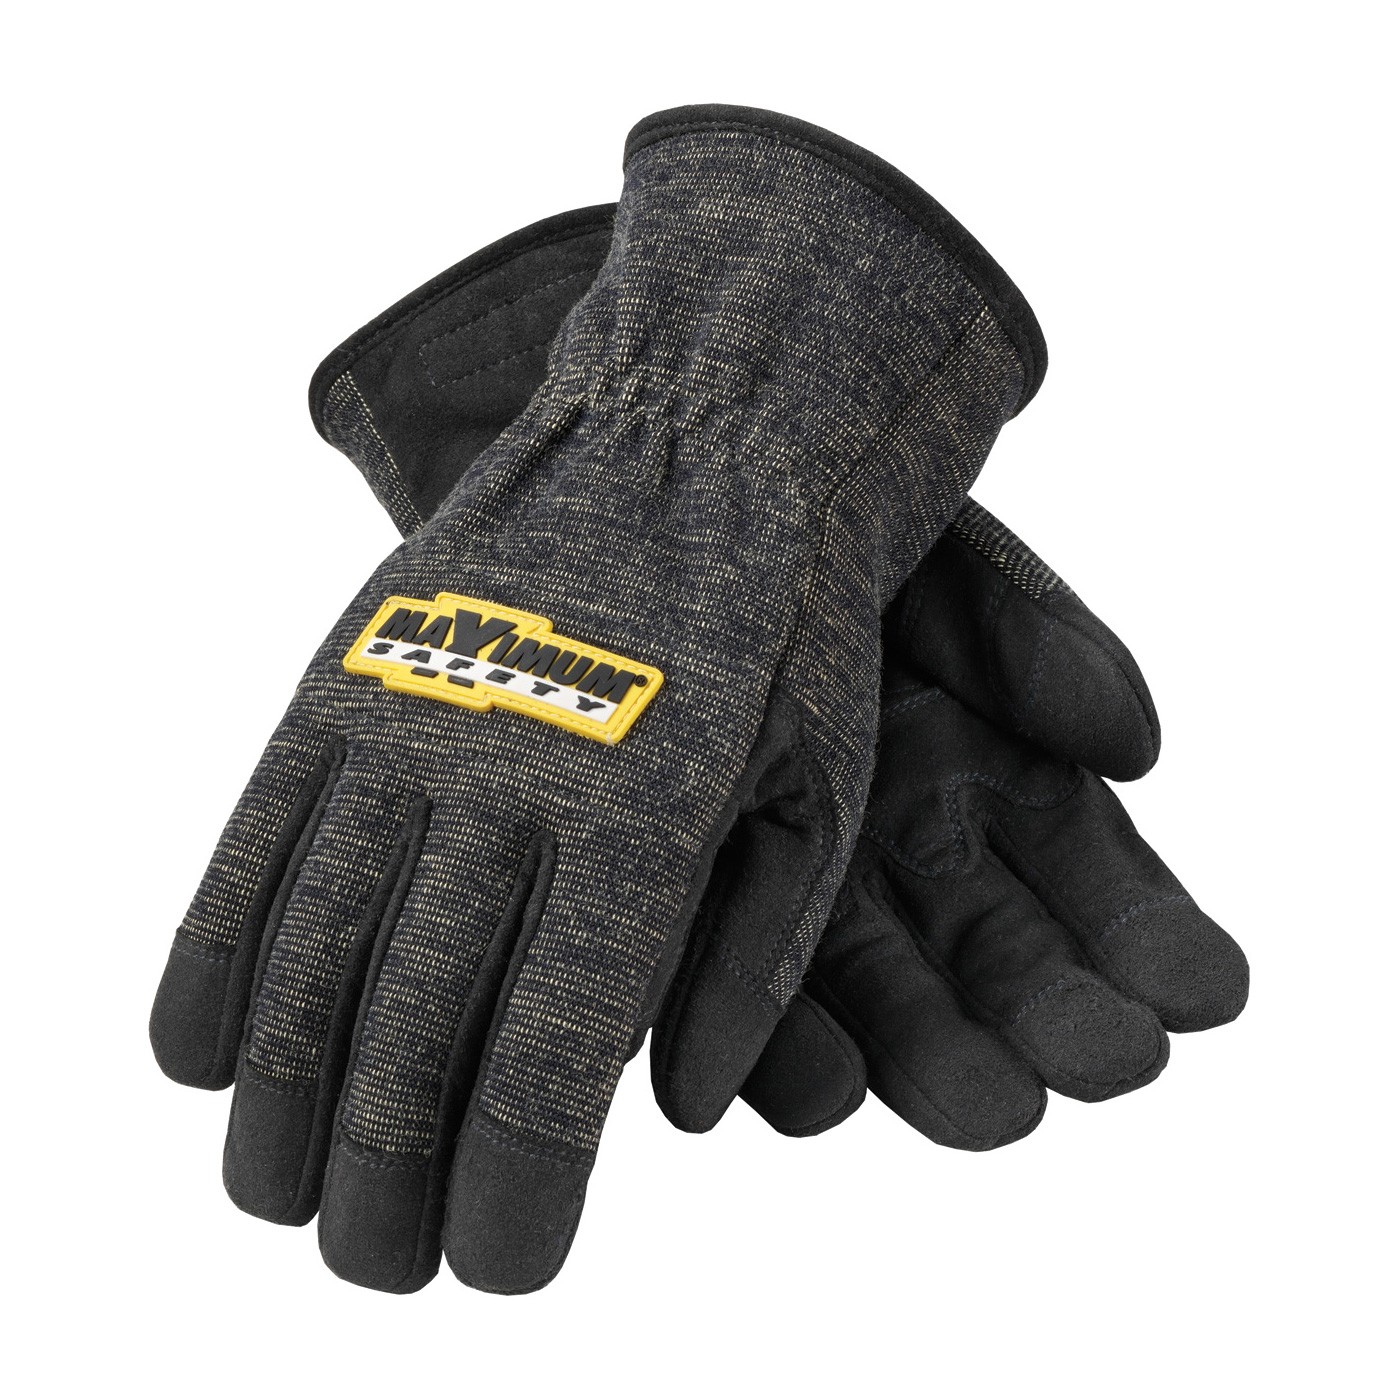 FR Treated Synthetic Leather Glove, Kevlar Lined, Reinforced Palm Size Small